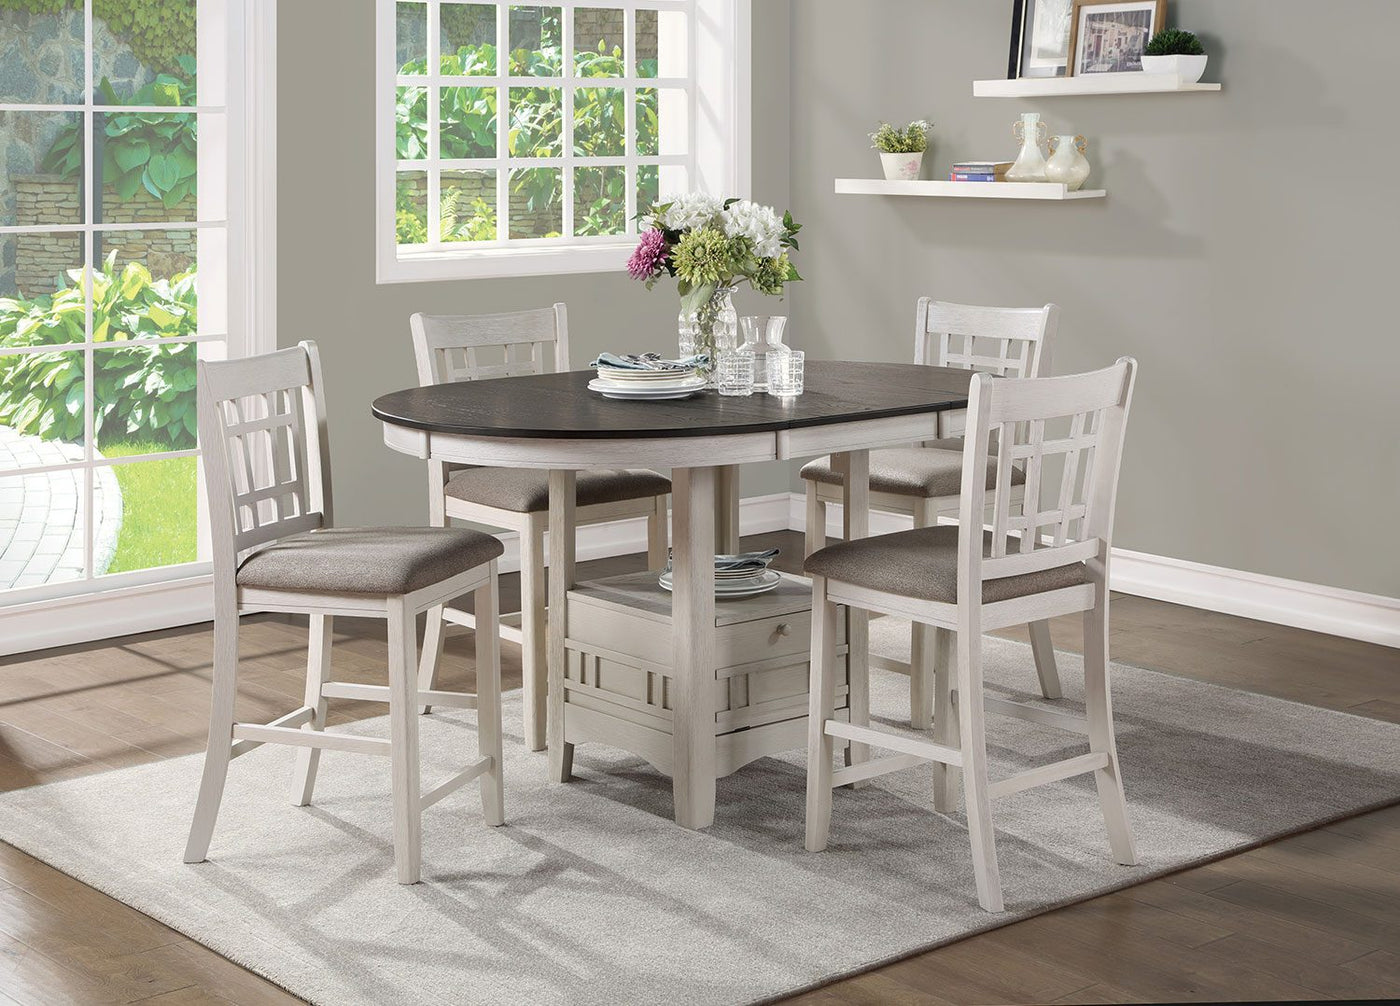 Freda Extendable Counter Height Dining Table - White, Dark Brown